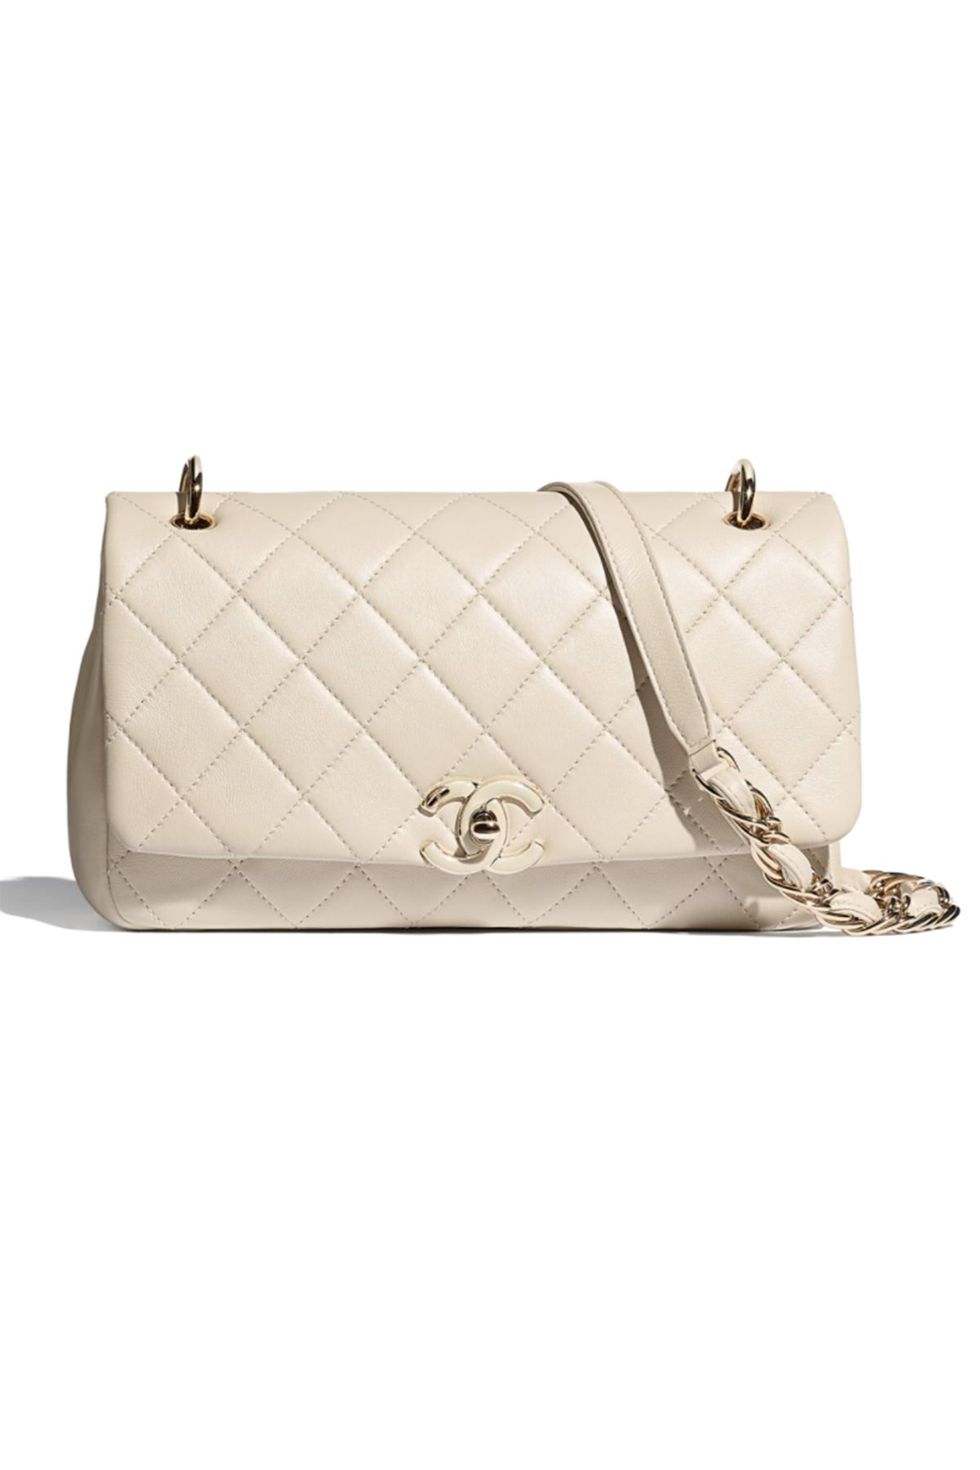 chanel bag in white